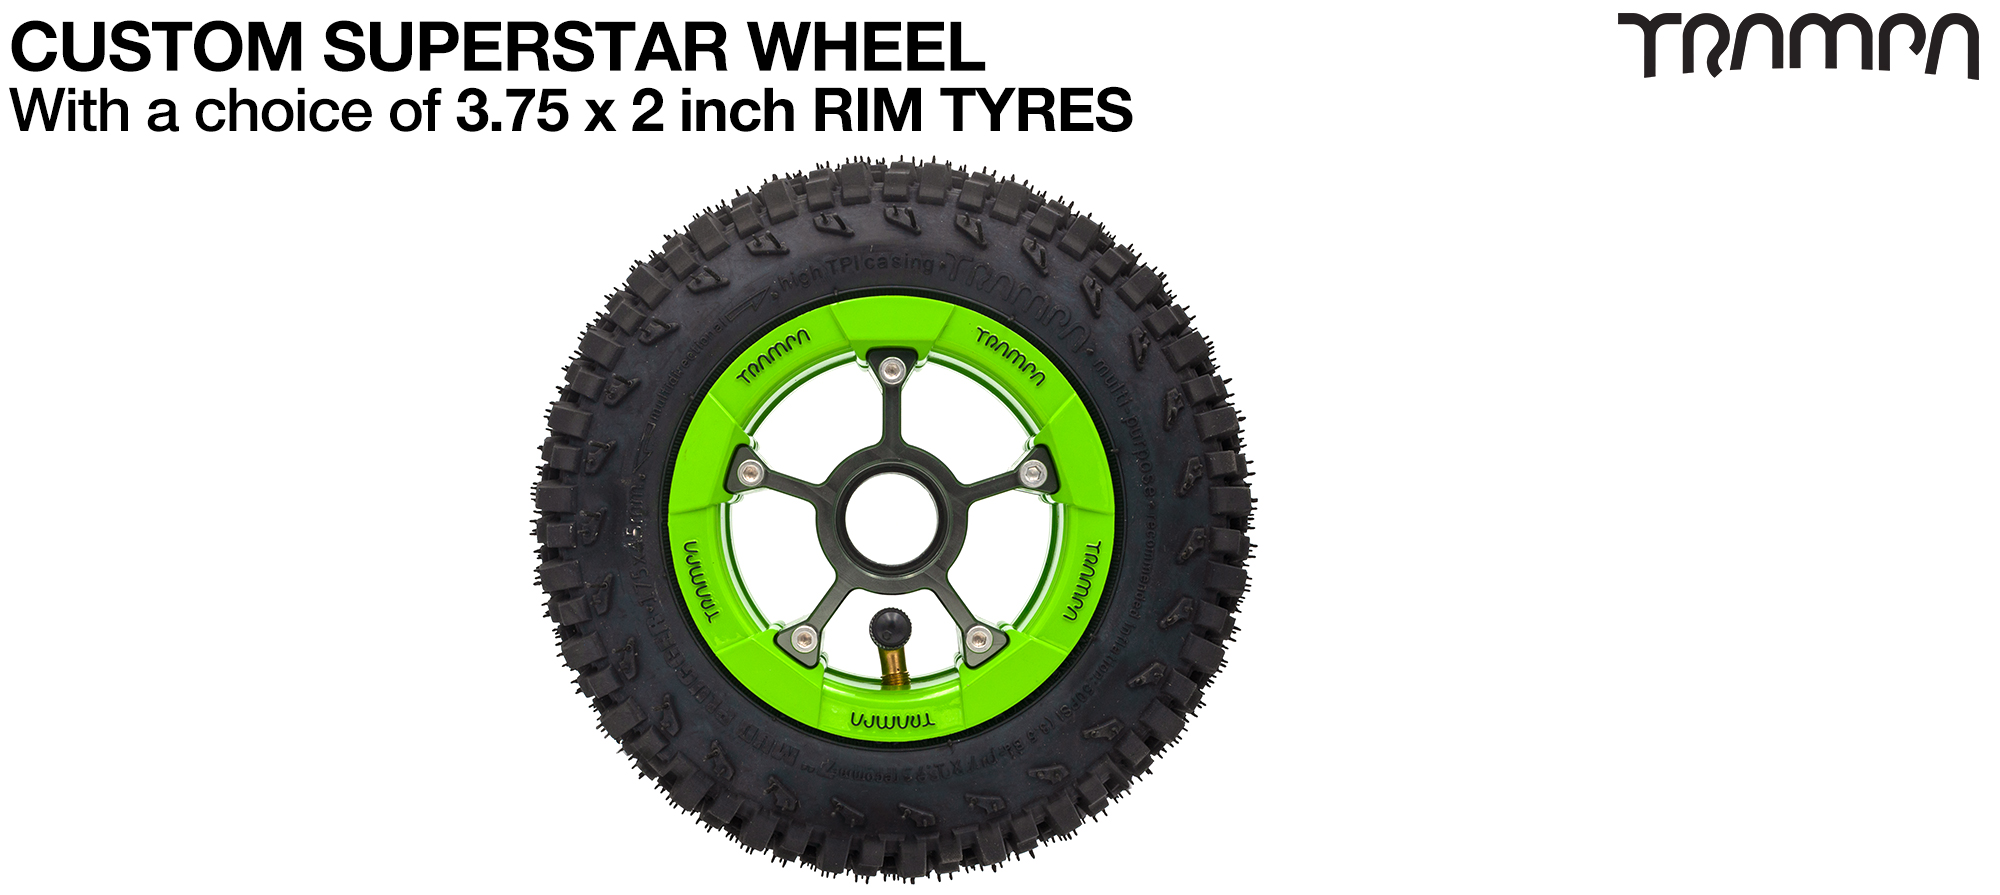 SUPERSTAR WHEEL showing with 7 Inch MUD-PLUGGER Tyre 3.75 x 2 Inch! Build the SUPERSTAR wheel of your dreams!! Any combination possible up to 8 inch Tyres 